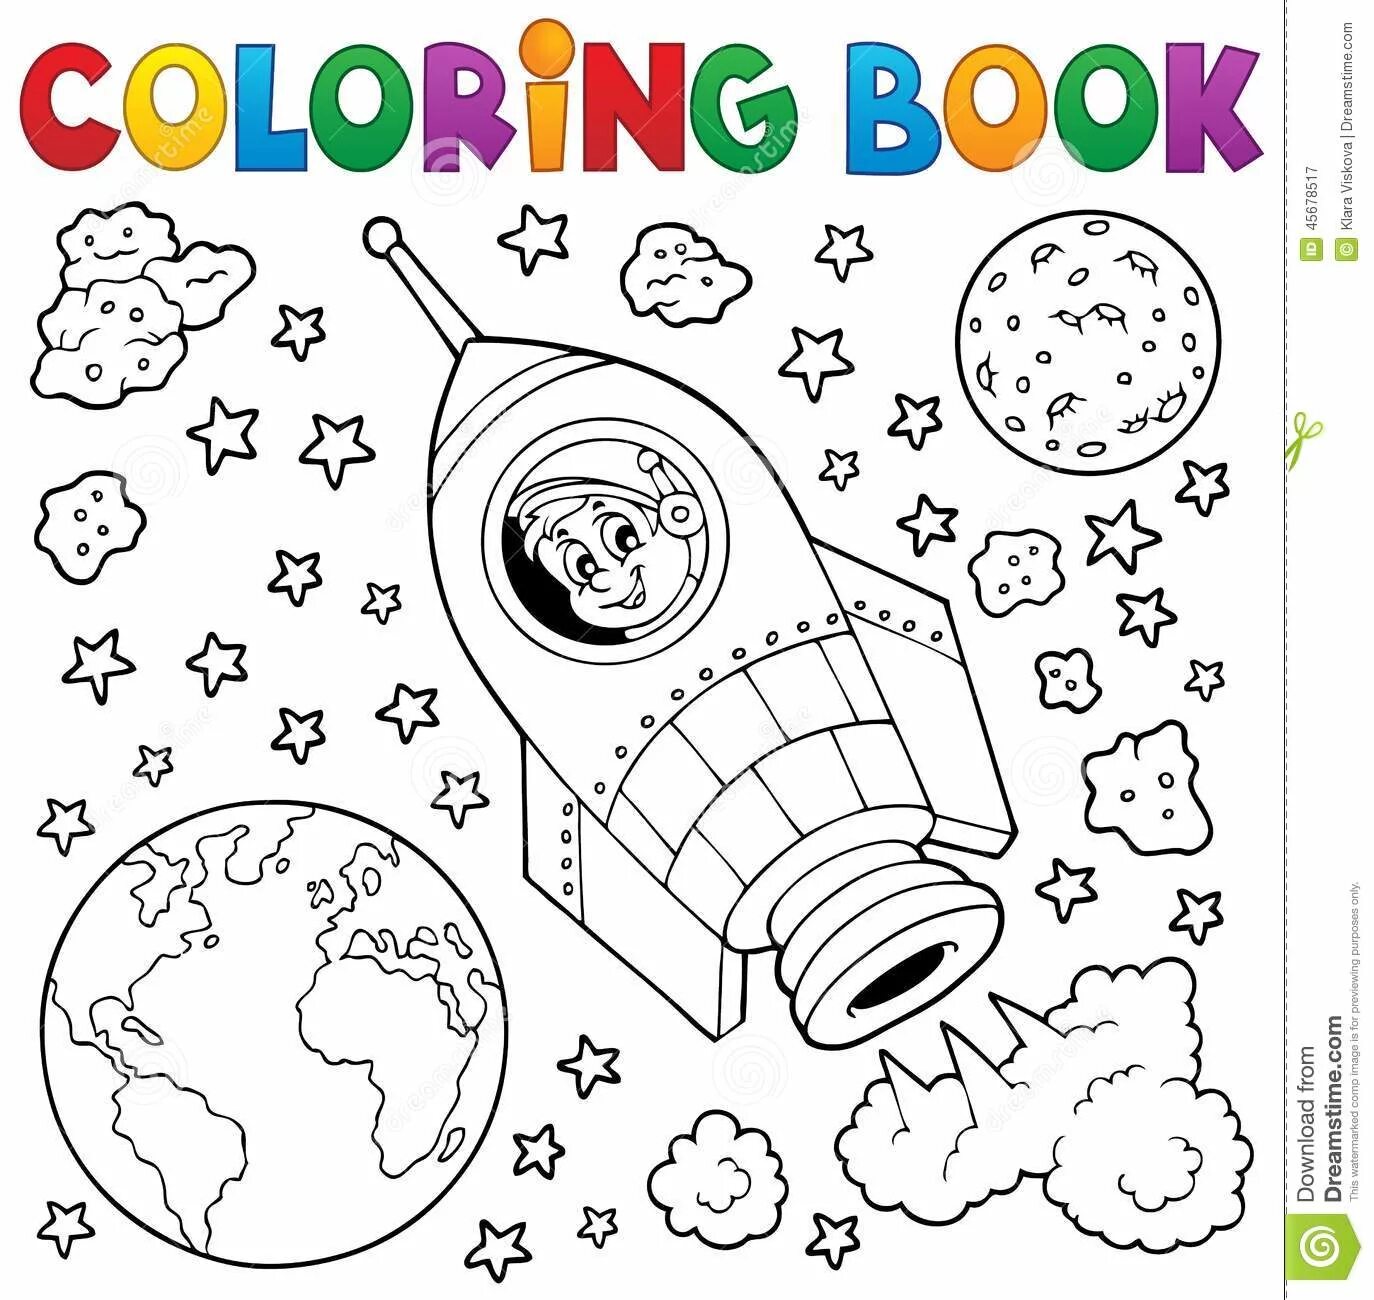 Incredible galaxy coloring book for 4-5 year olds